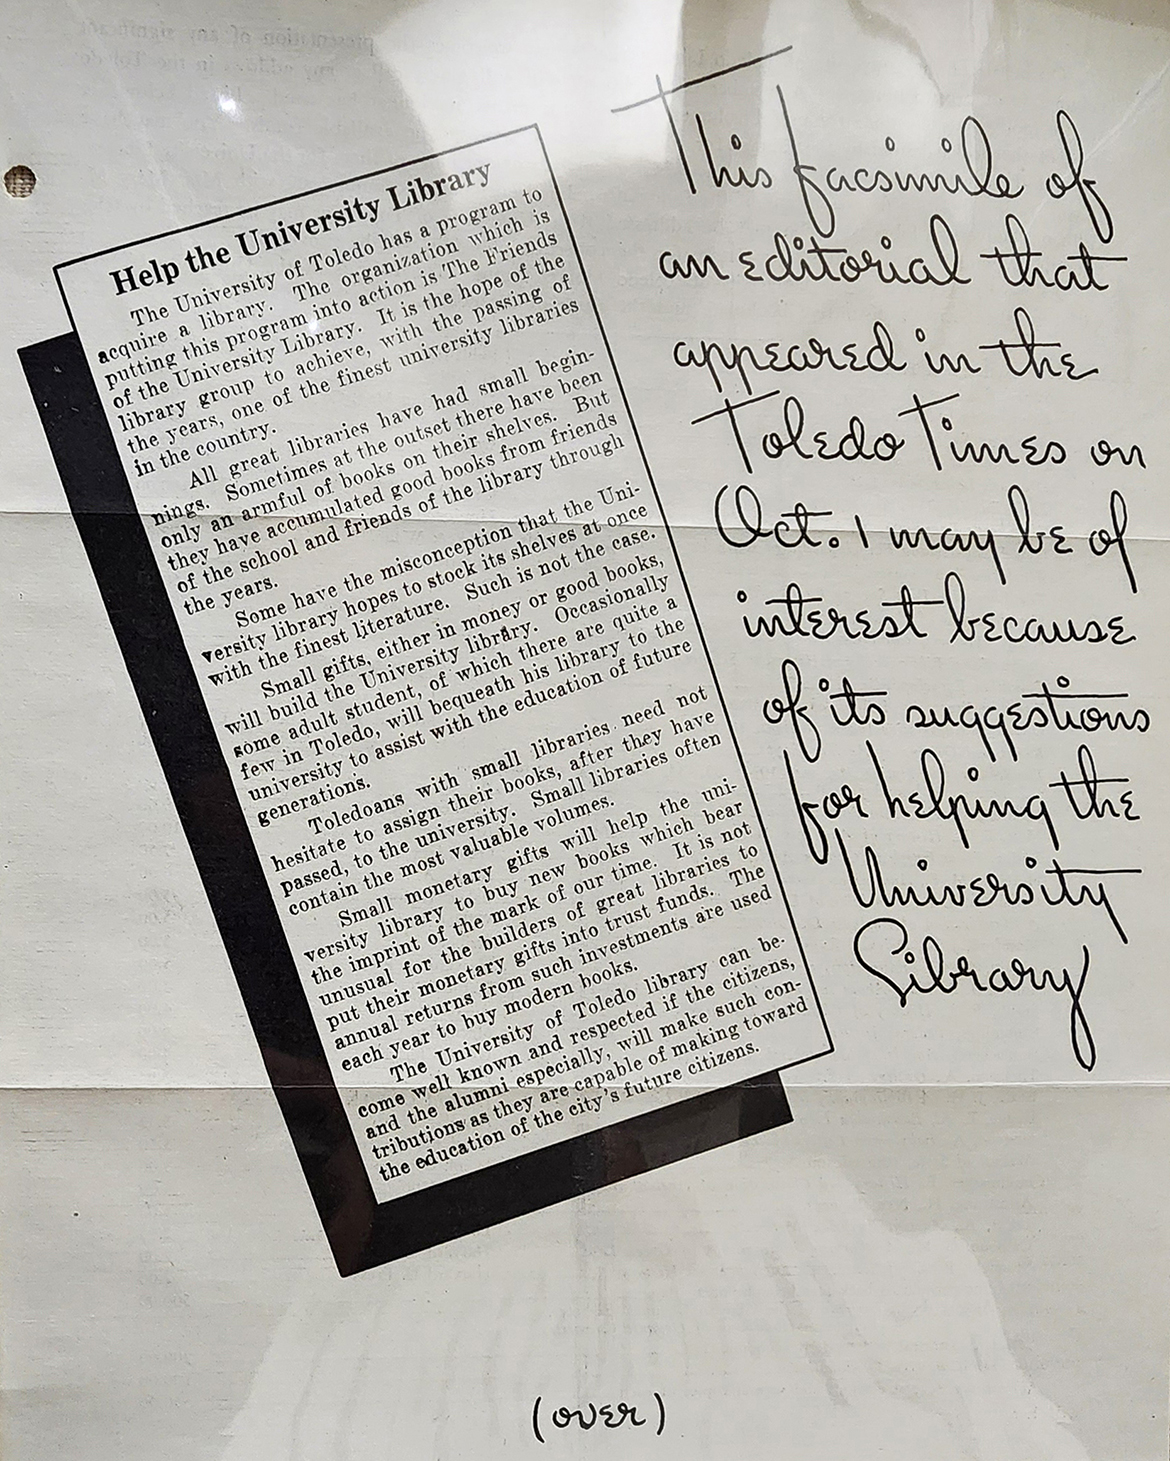 Help the University Library, Facsimile of Toledo Times Editorial on October 1 [1938]